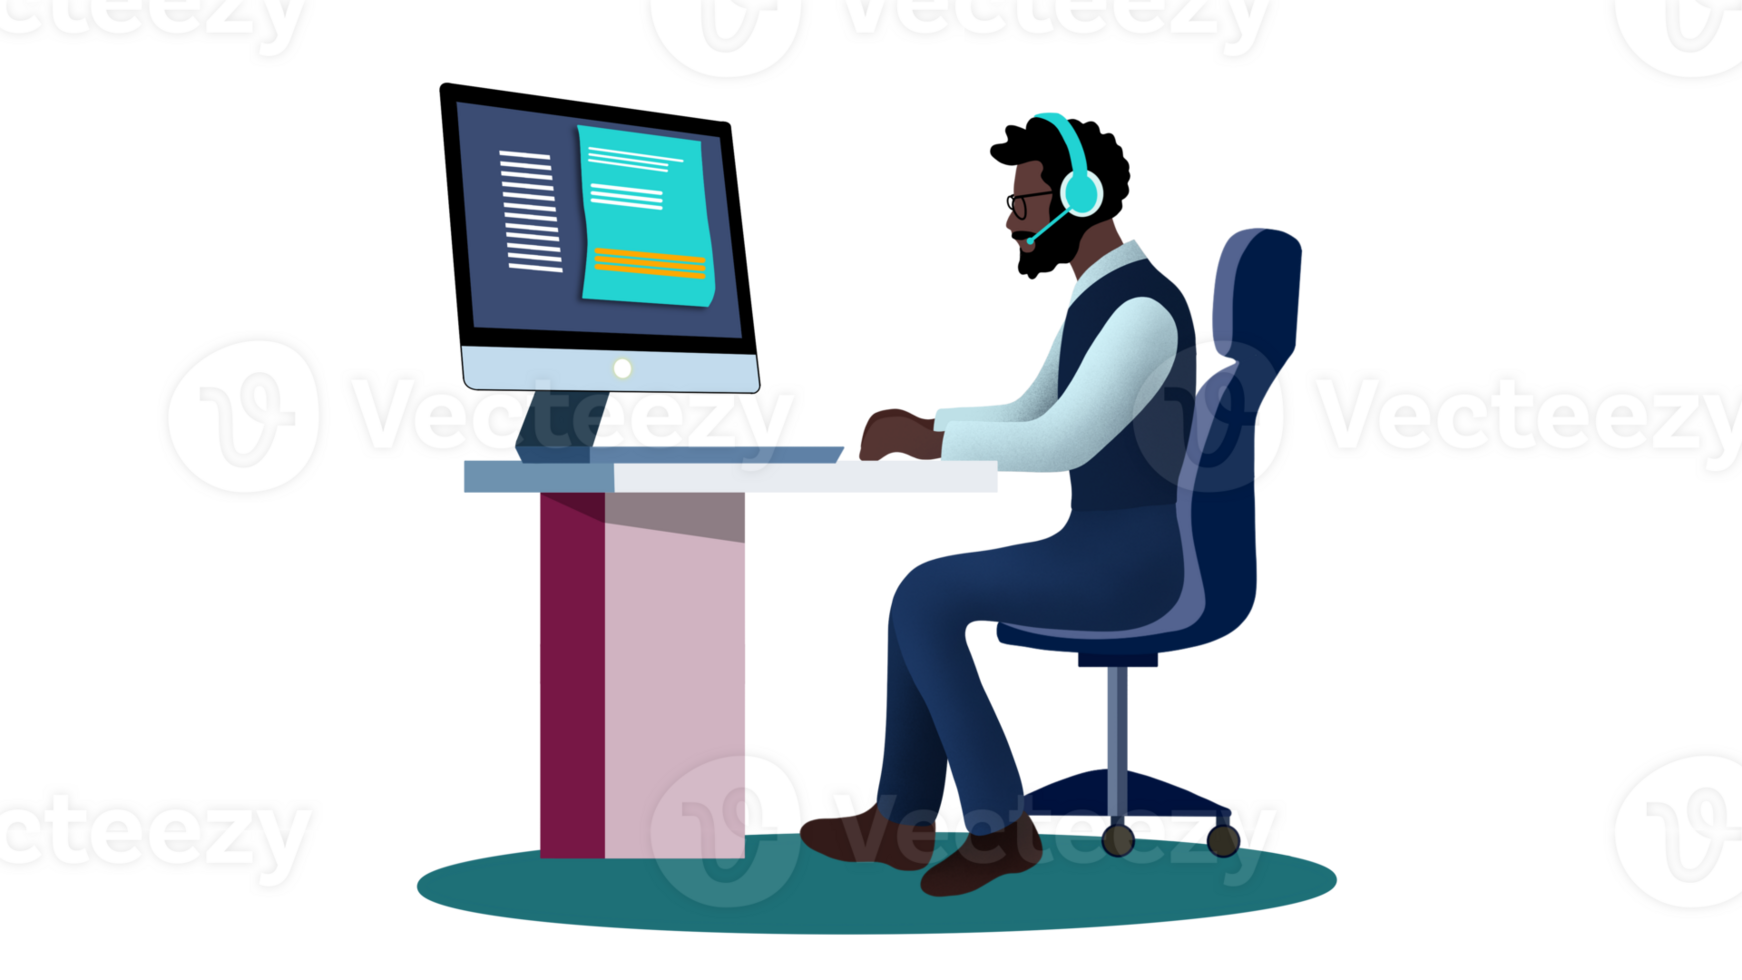 Operators are working to contact customers online and by telephone, A programmer is working on the next big thing, Working from home, Support service, the operator with headphones and microphone png